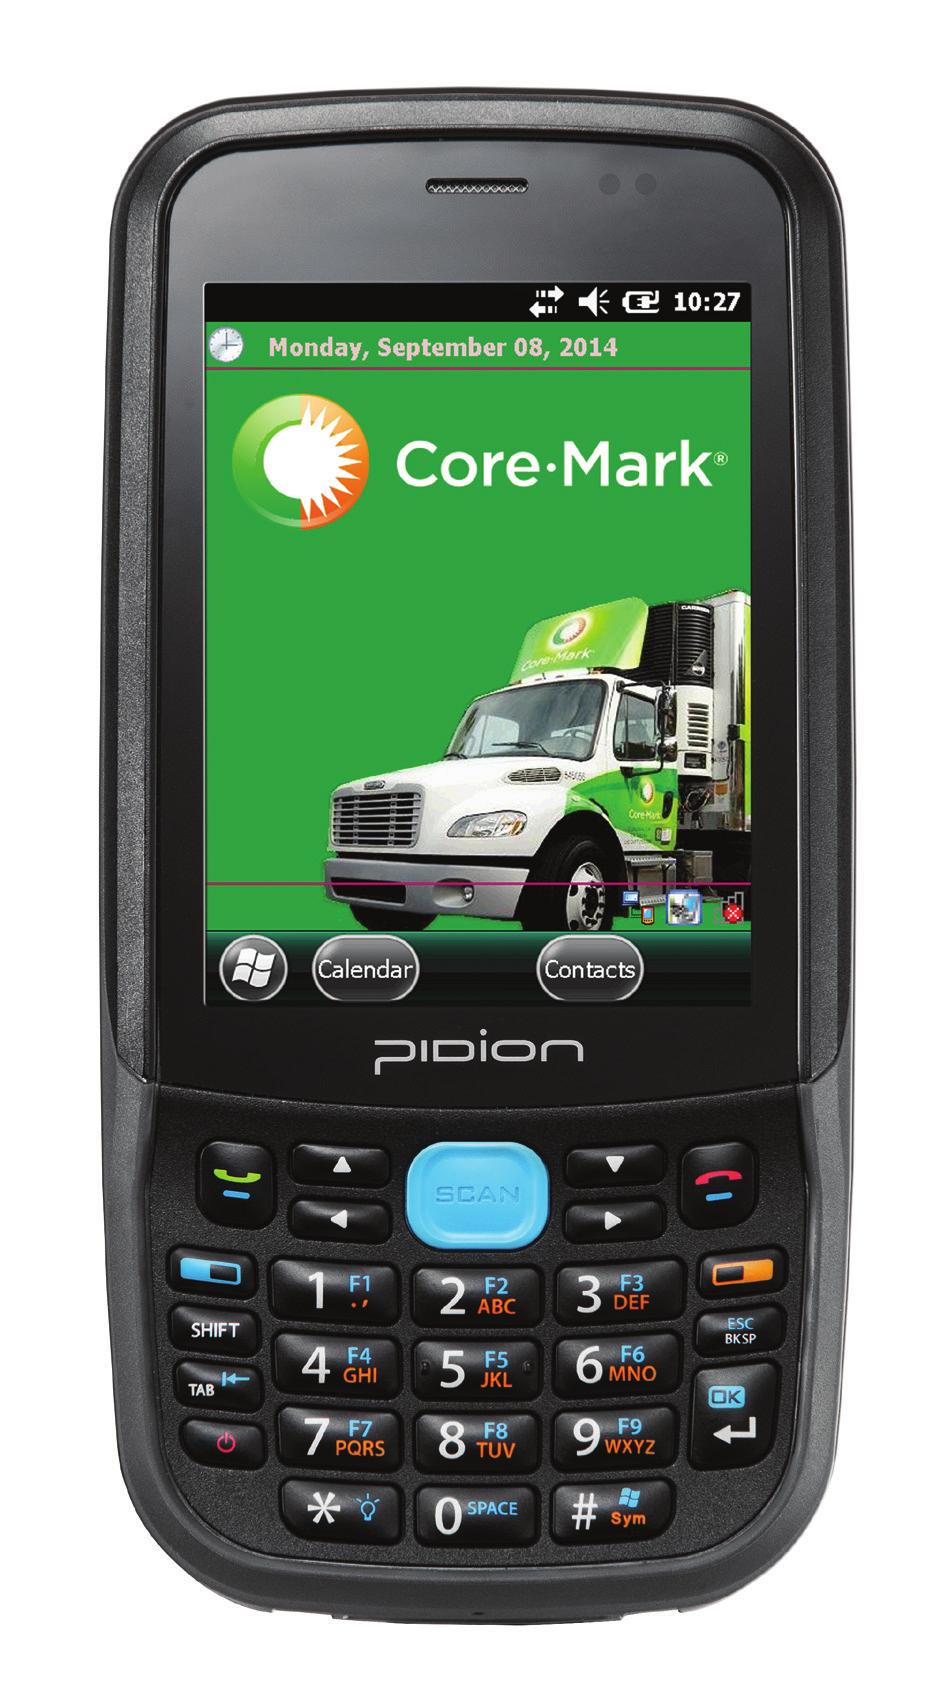 imark HAND-HELD ORDERING SMART DEVICE Do you find yourself looking for the next big thing? A tool to help manage your business more effectively?